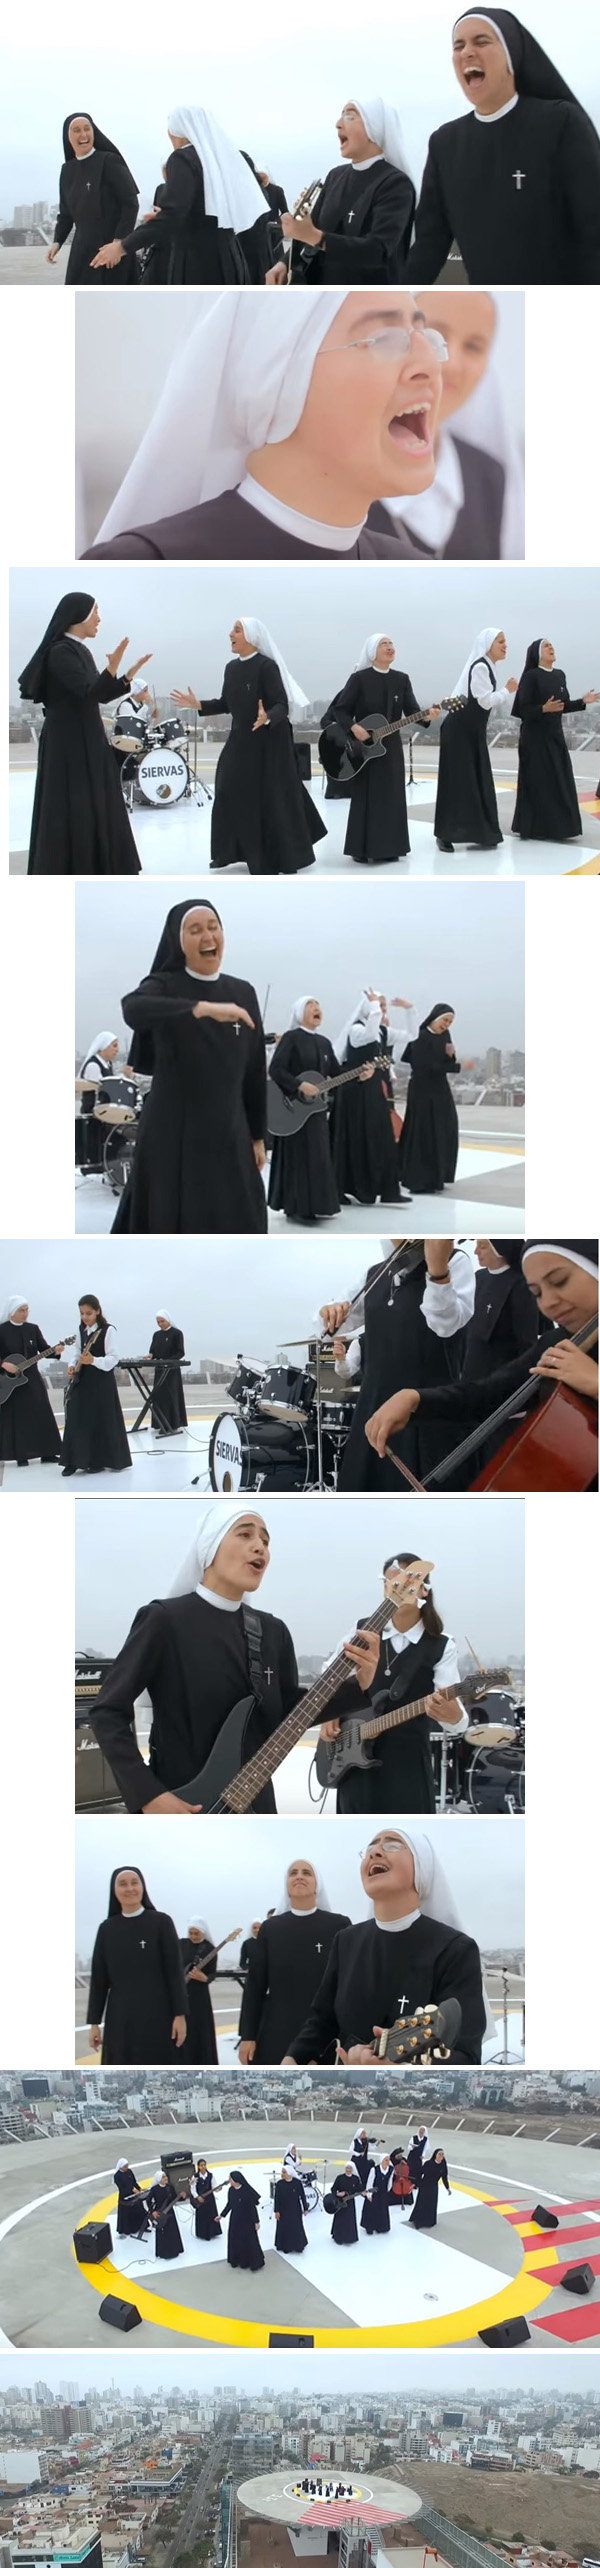 Photograph collage of the Siervas nuns singing, yelling, and performing outdoors on a helicopter pad